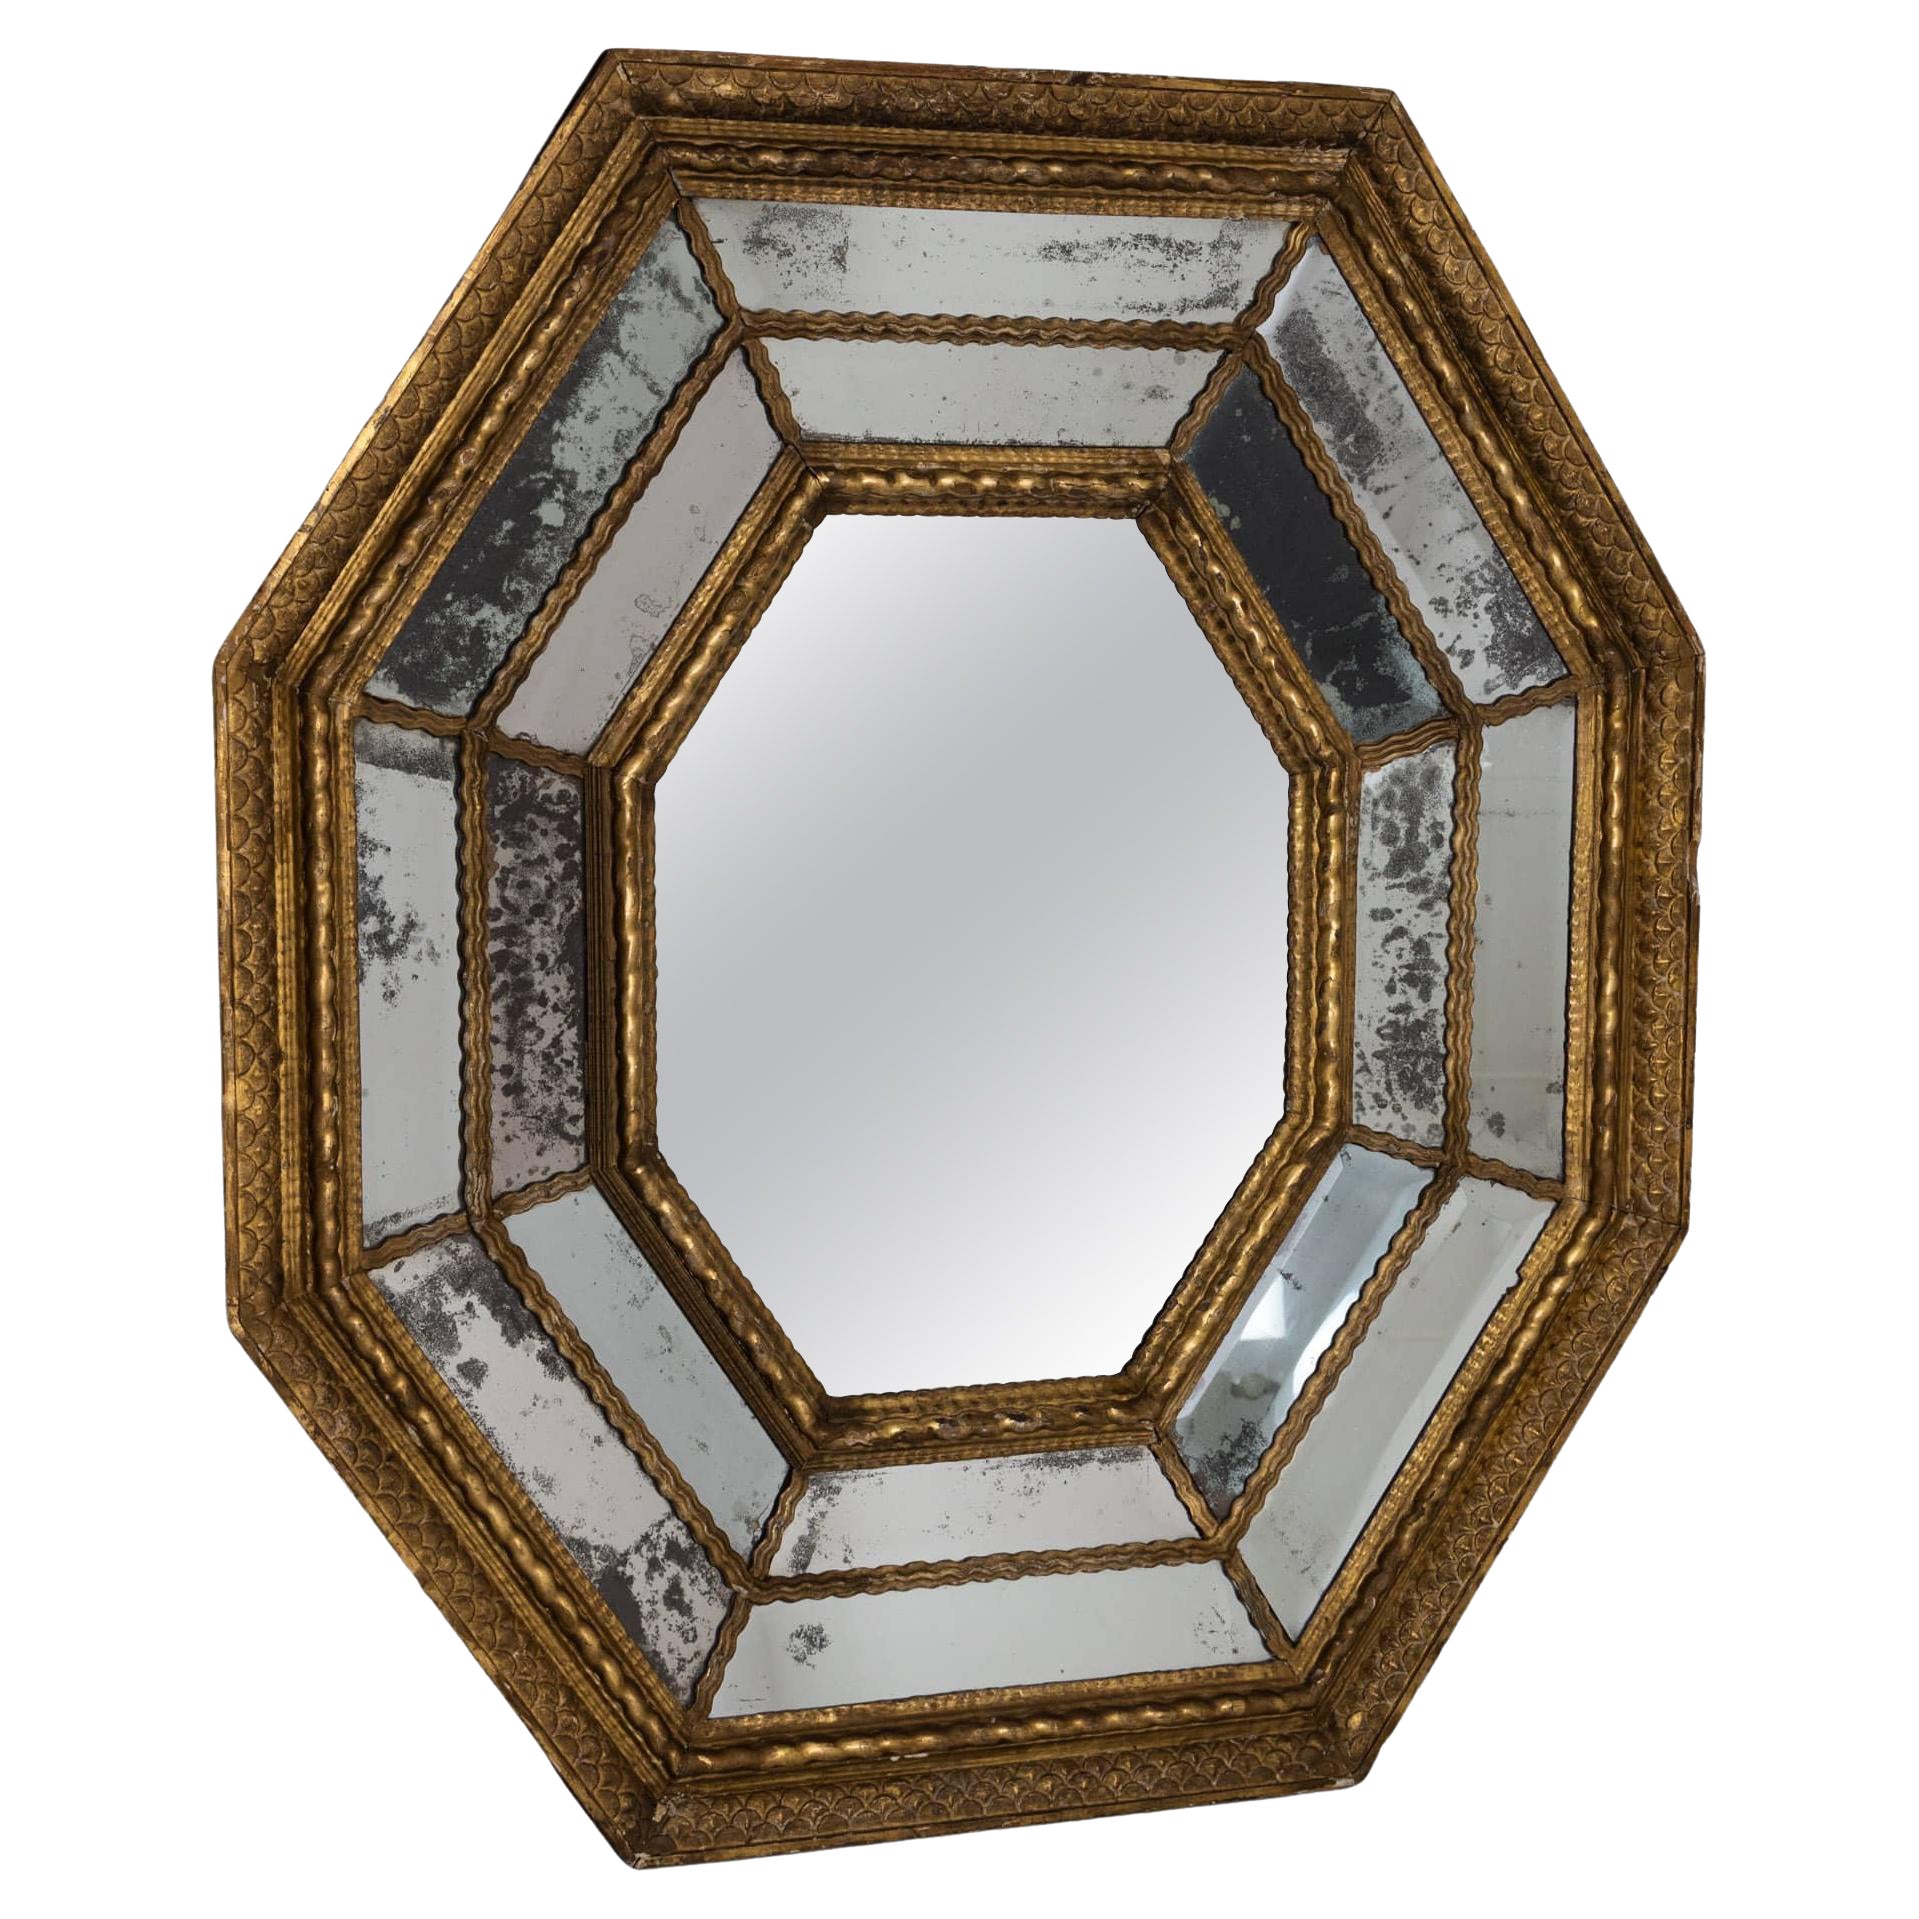 Octagonal Gilt and Facetted Wall Mirror, Spain, 17th century